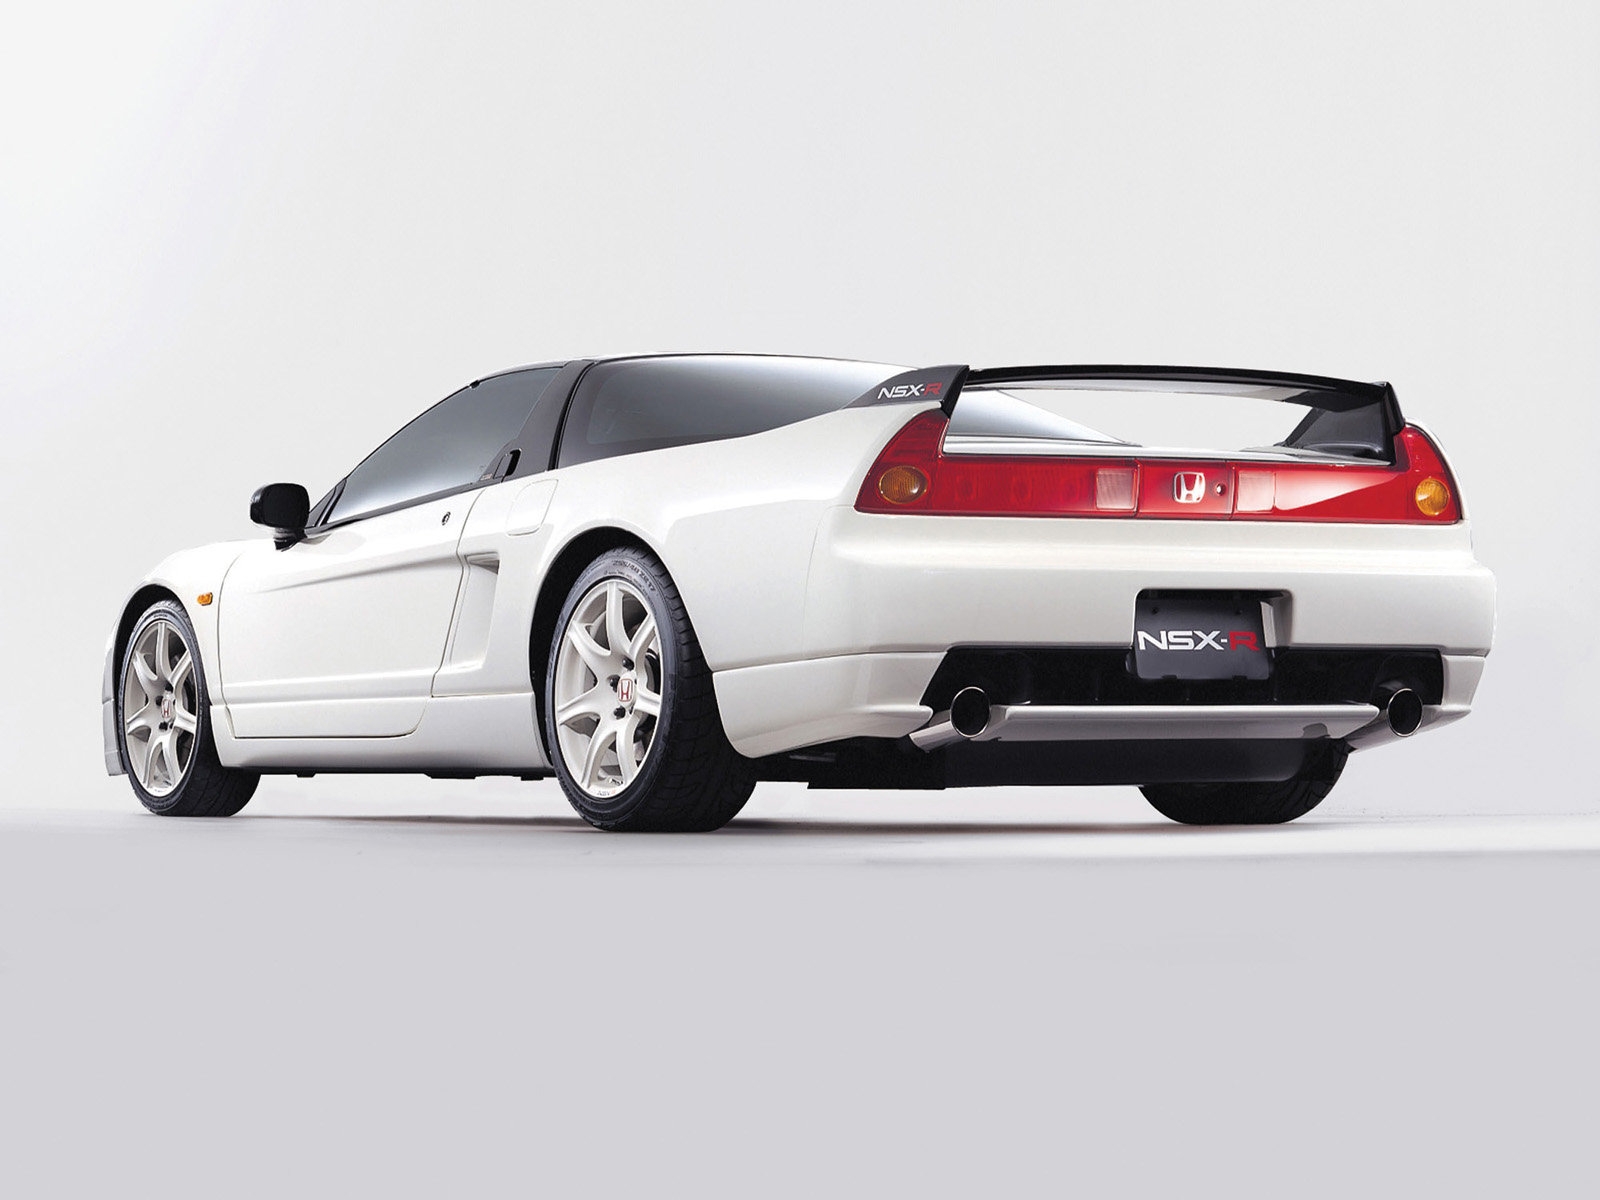 02aei05 Honda Nsx R Na2 Supercar Supercars Nsx Wallpapers Hd Desktop And Mobile Backgrounds